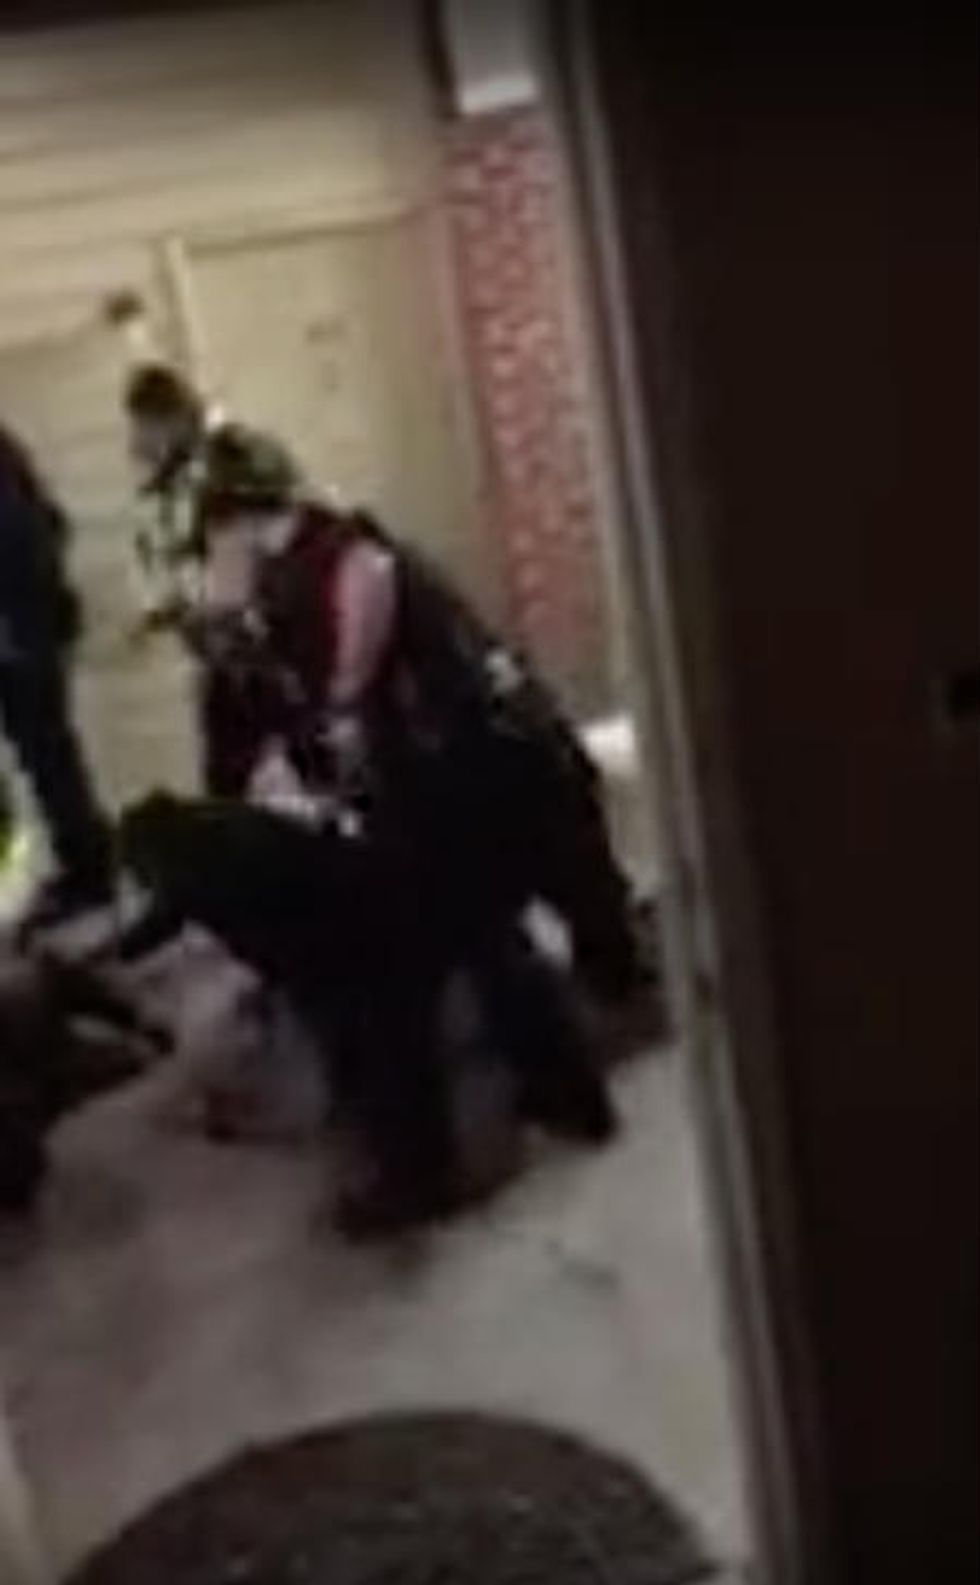 ‘Inside Perspective’ Video Shows the Chaos That Unfolds When Officer Forces His Way Into Students' Apartment; ‘Full Investigation’ Launched